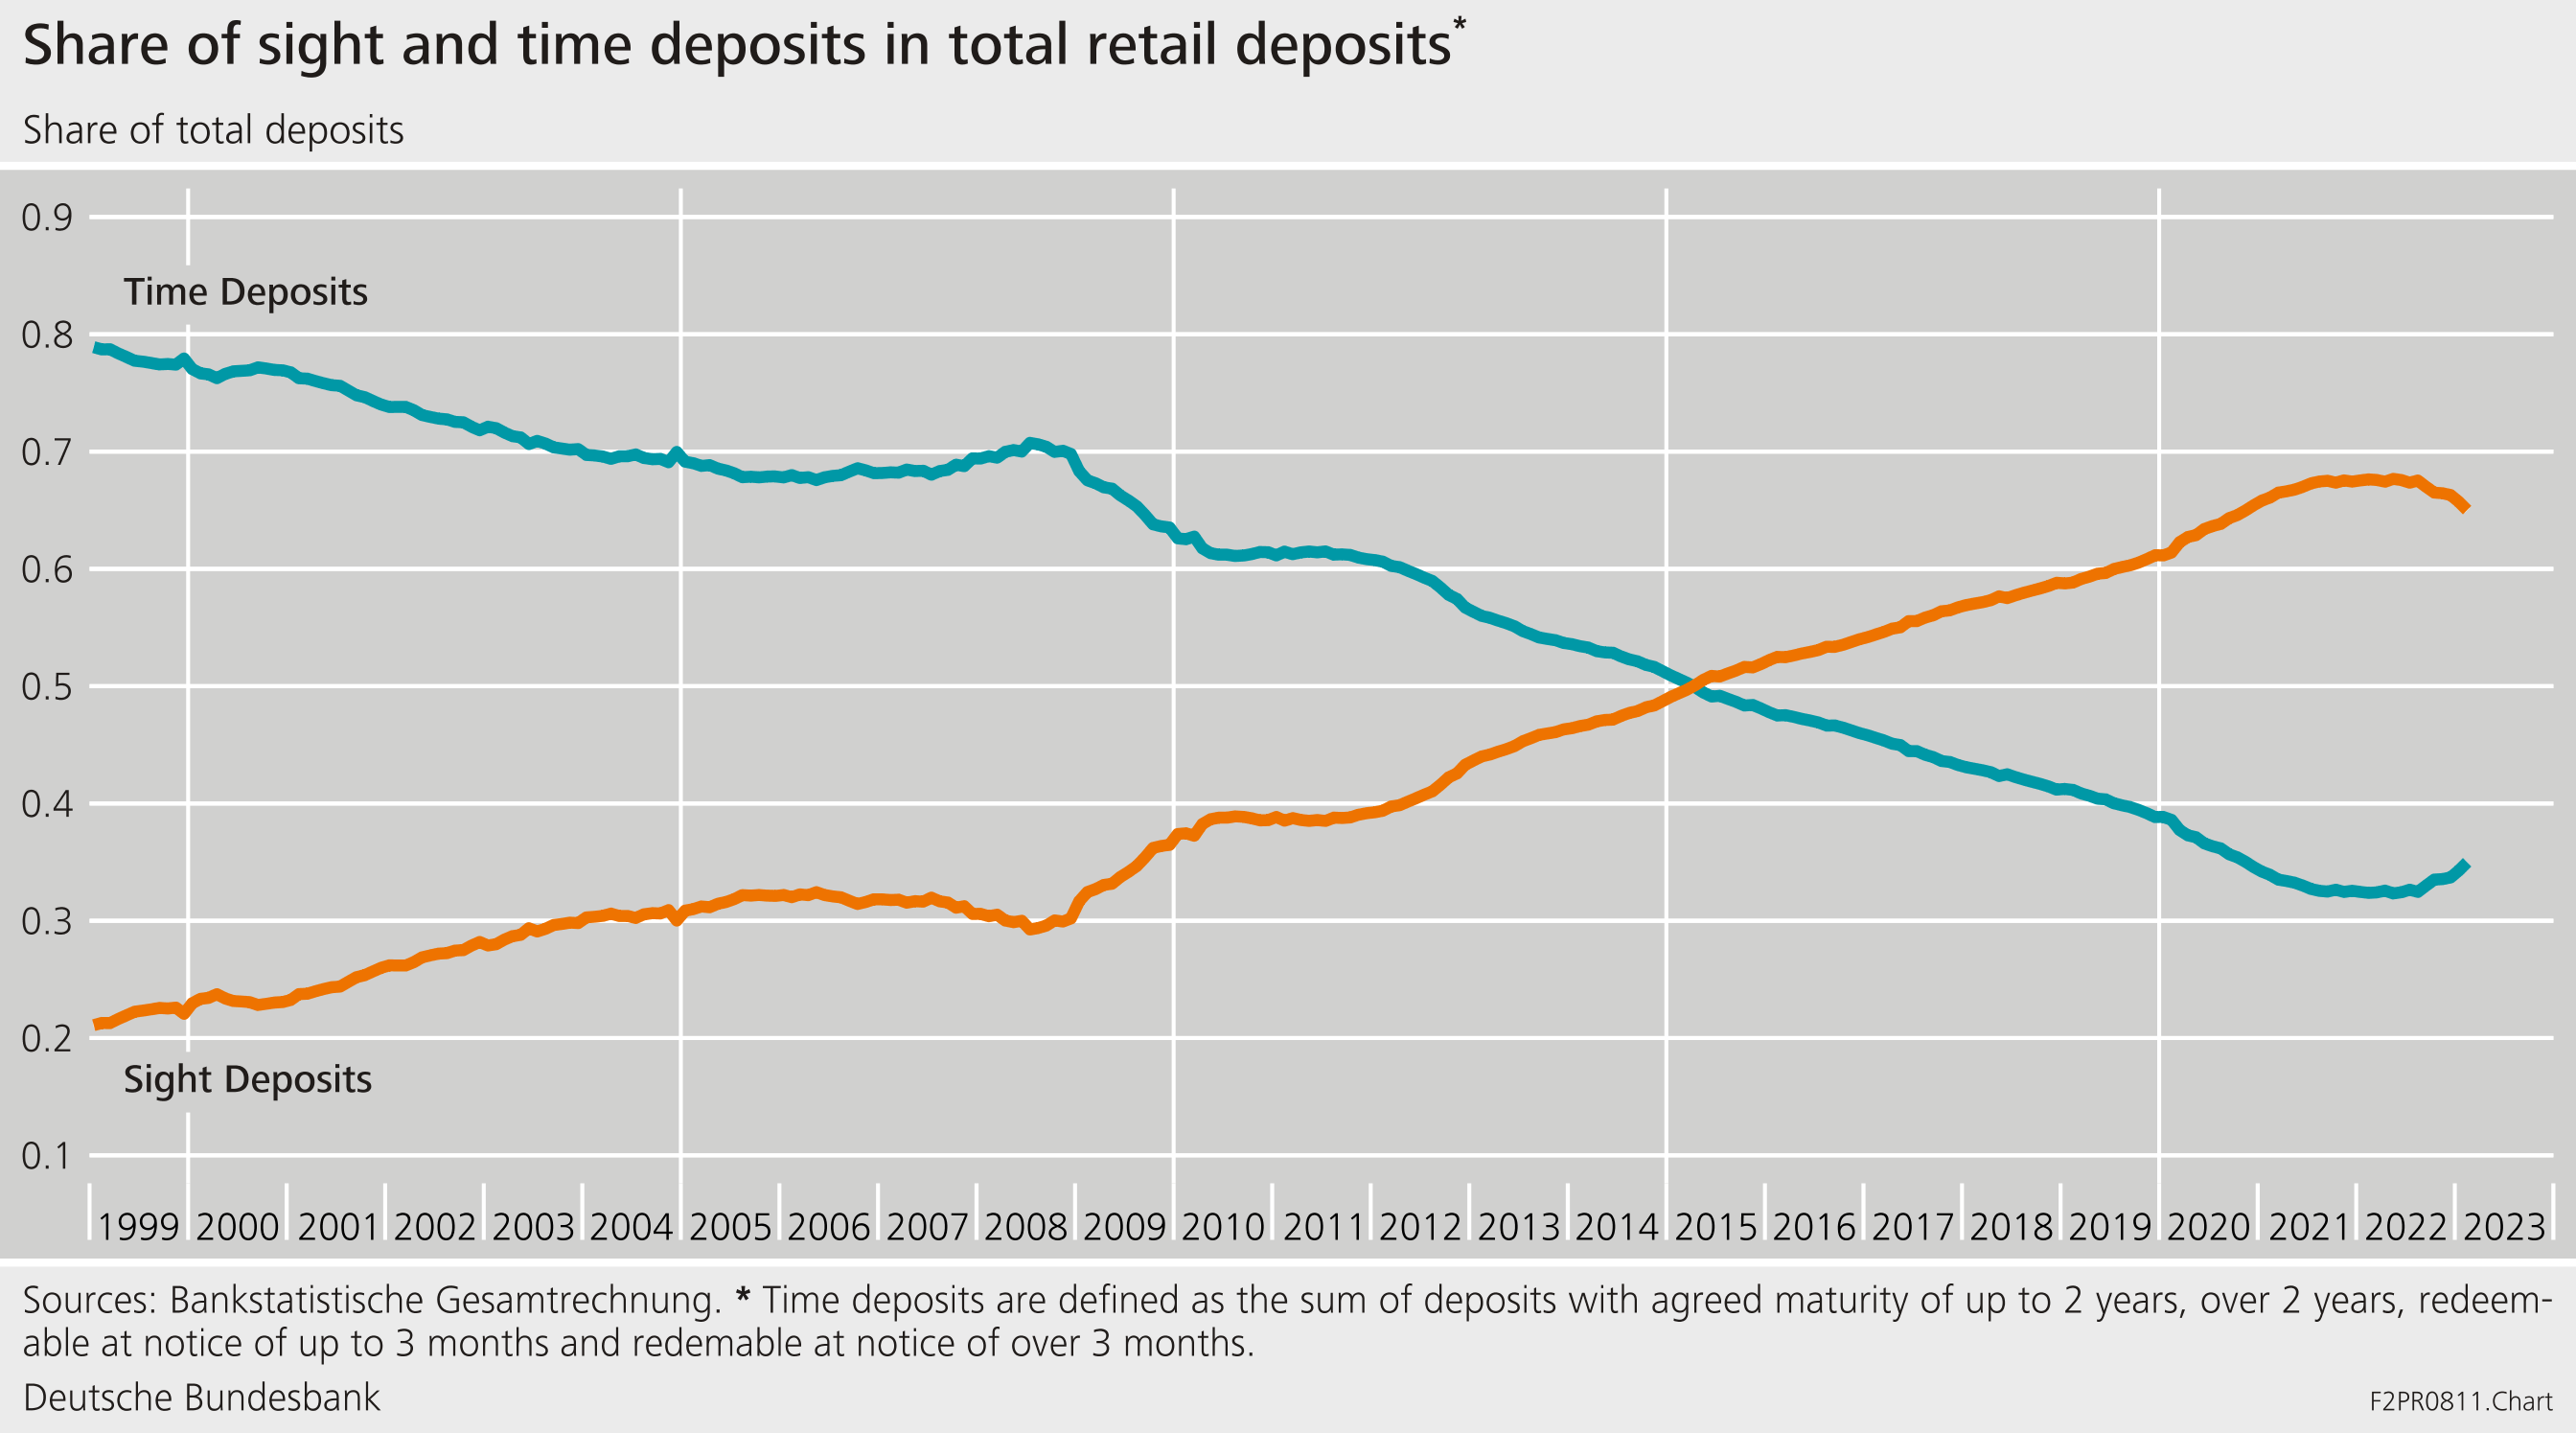 Figure 4: Share of sight and time deposits in total retail deposits